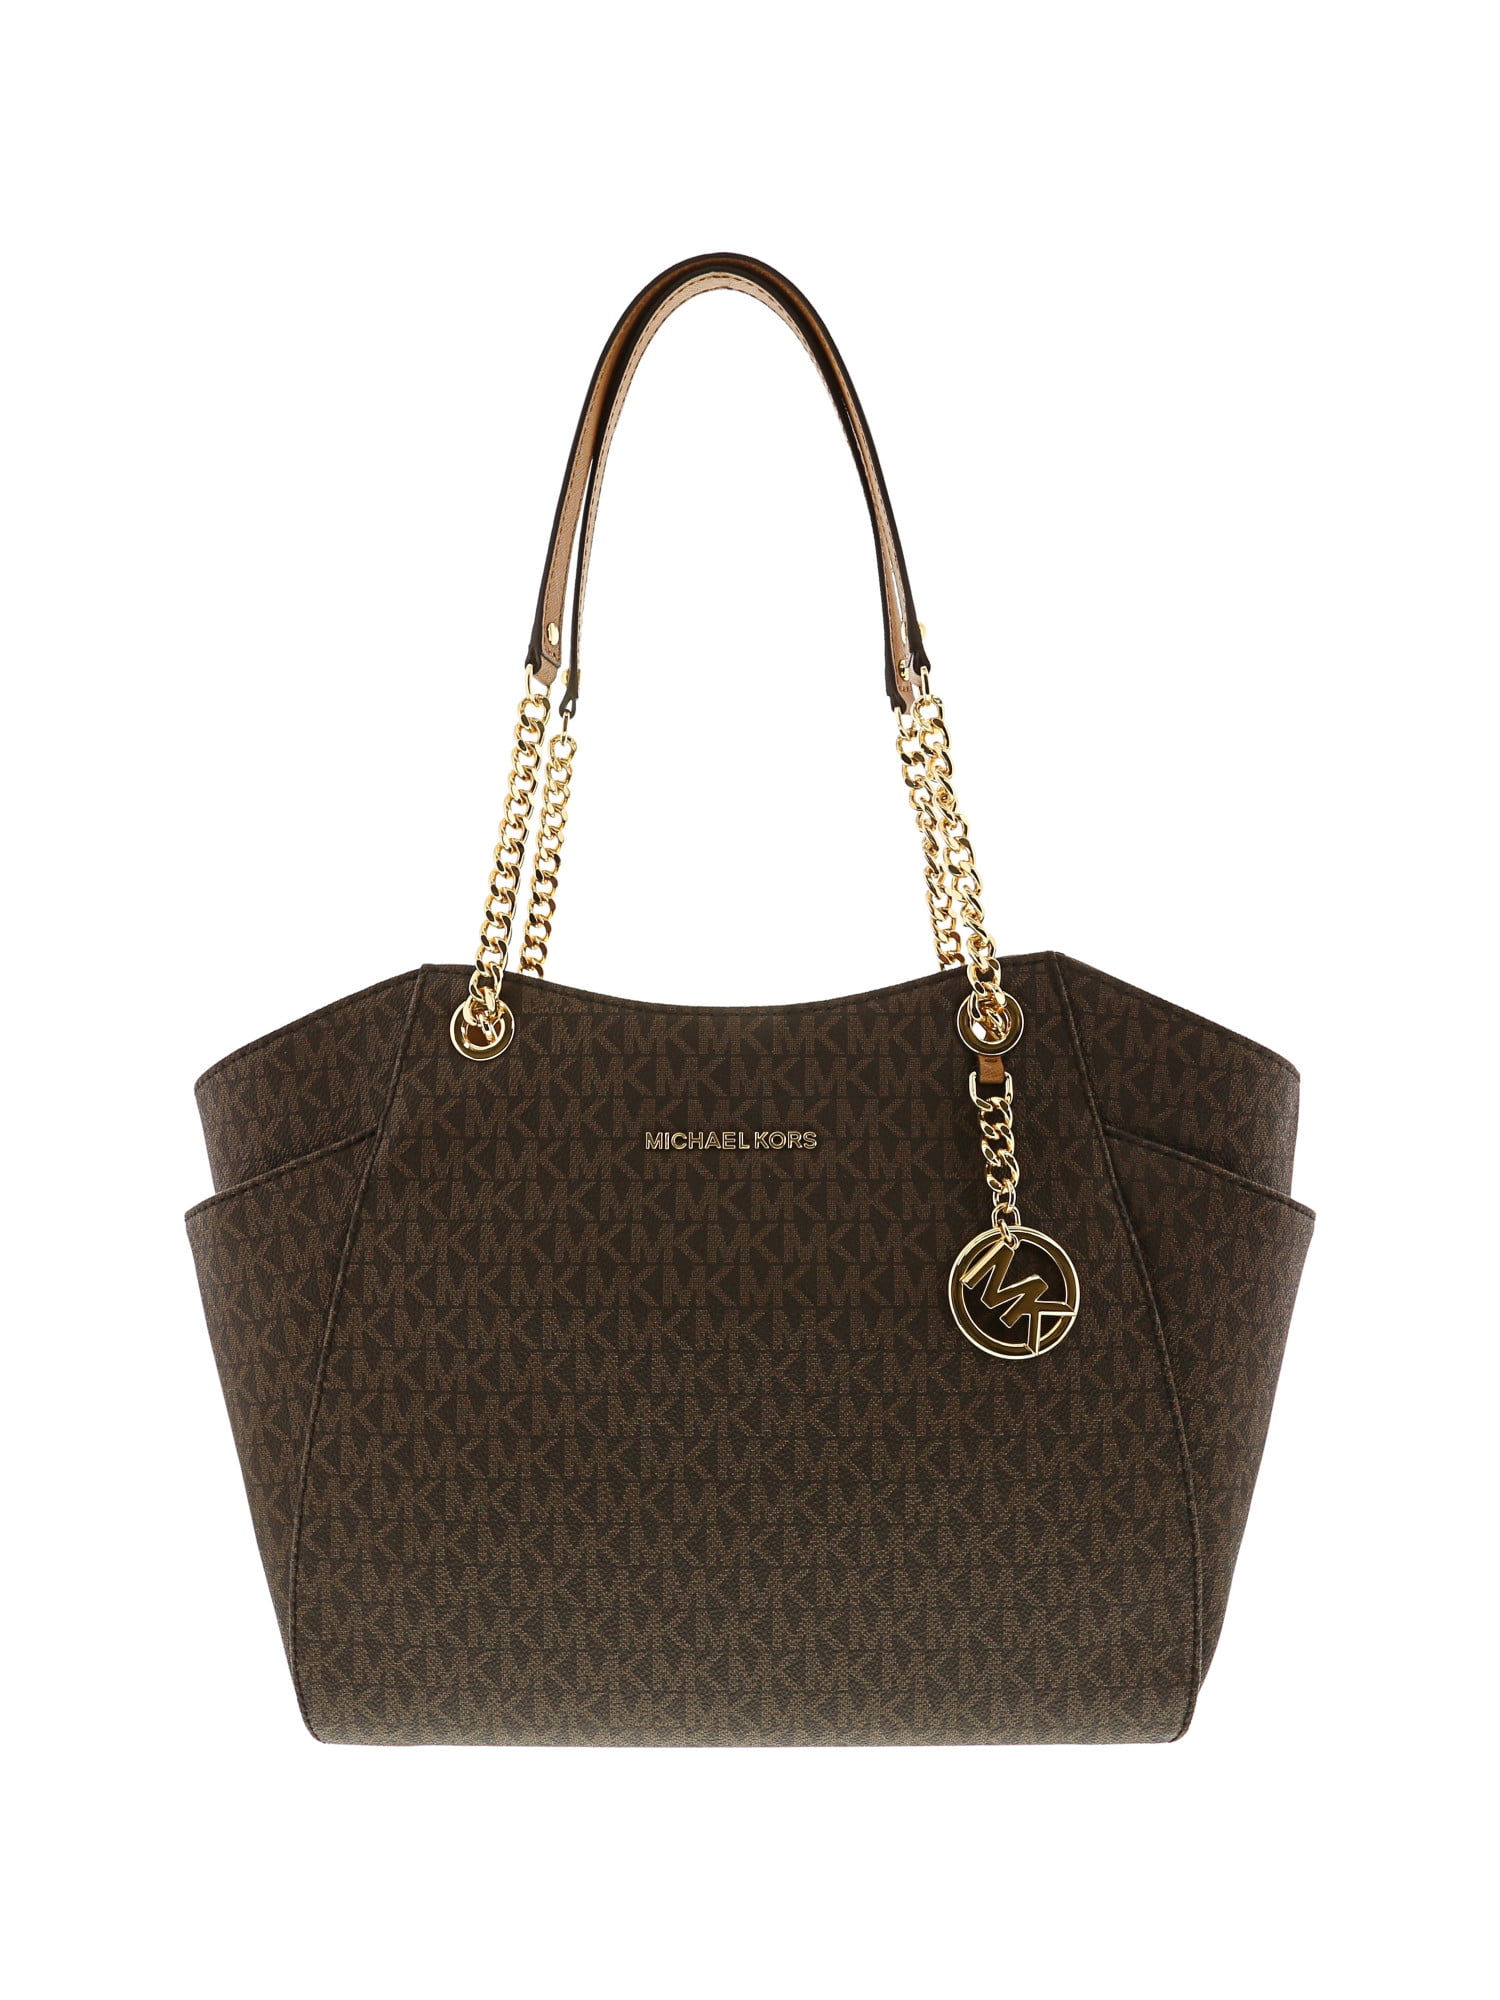 MICHAEL KORS MEL BROWN LEATHER/ LARGE TOTE W/ GOLD ACCENTS